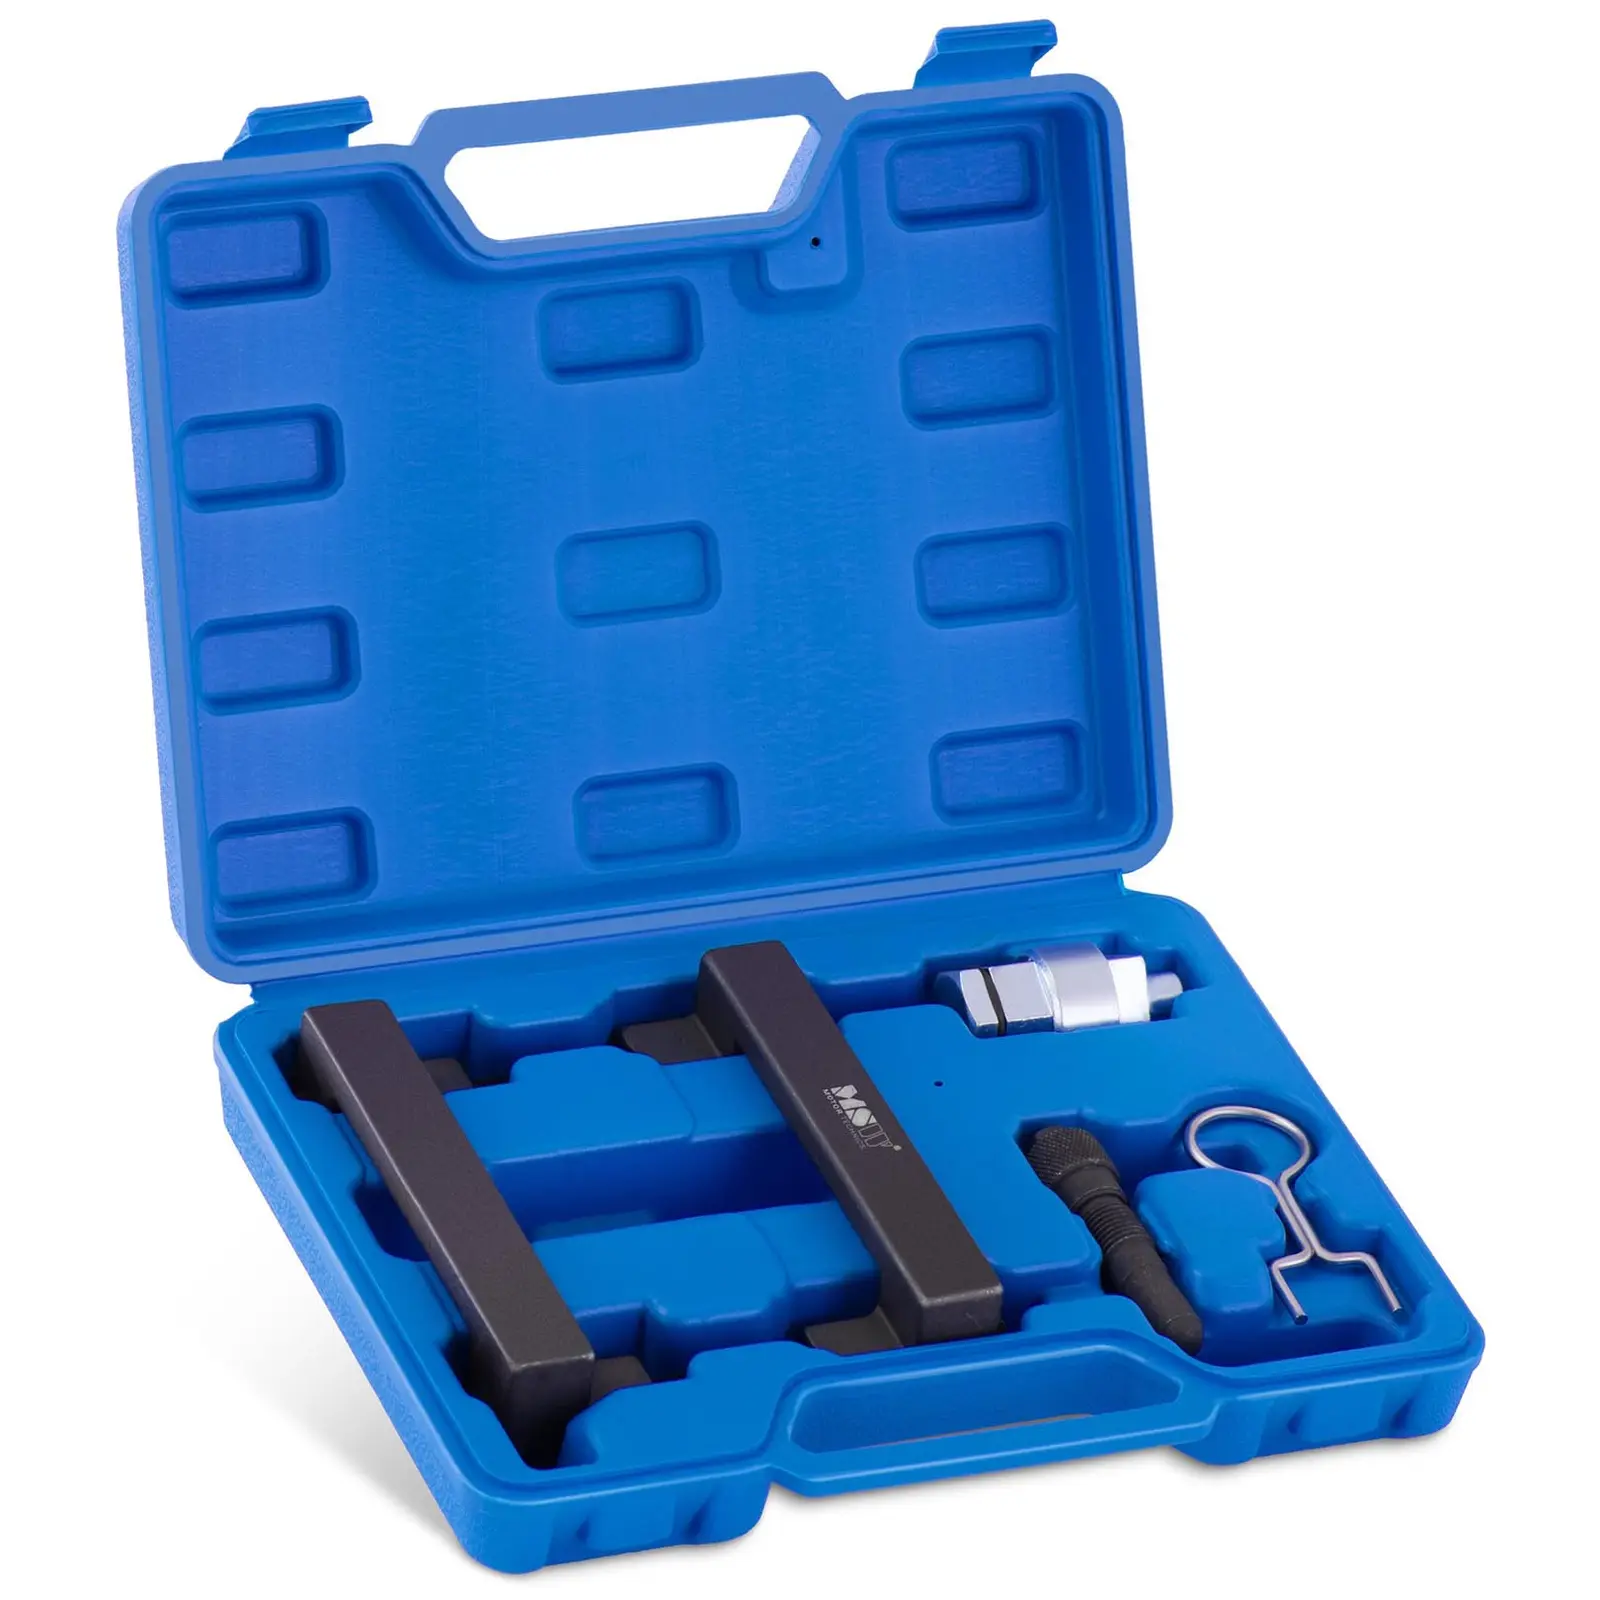 Timing Chain Tool Set - compatible with Audi - V6 and V10 engines